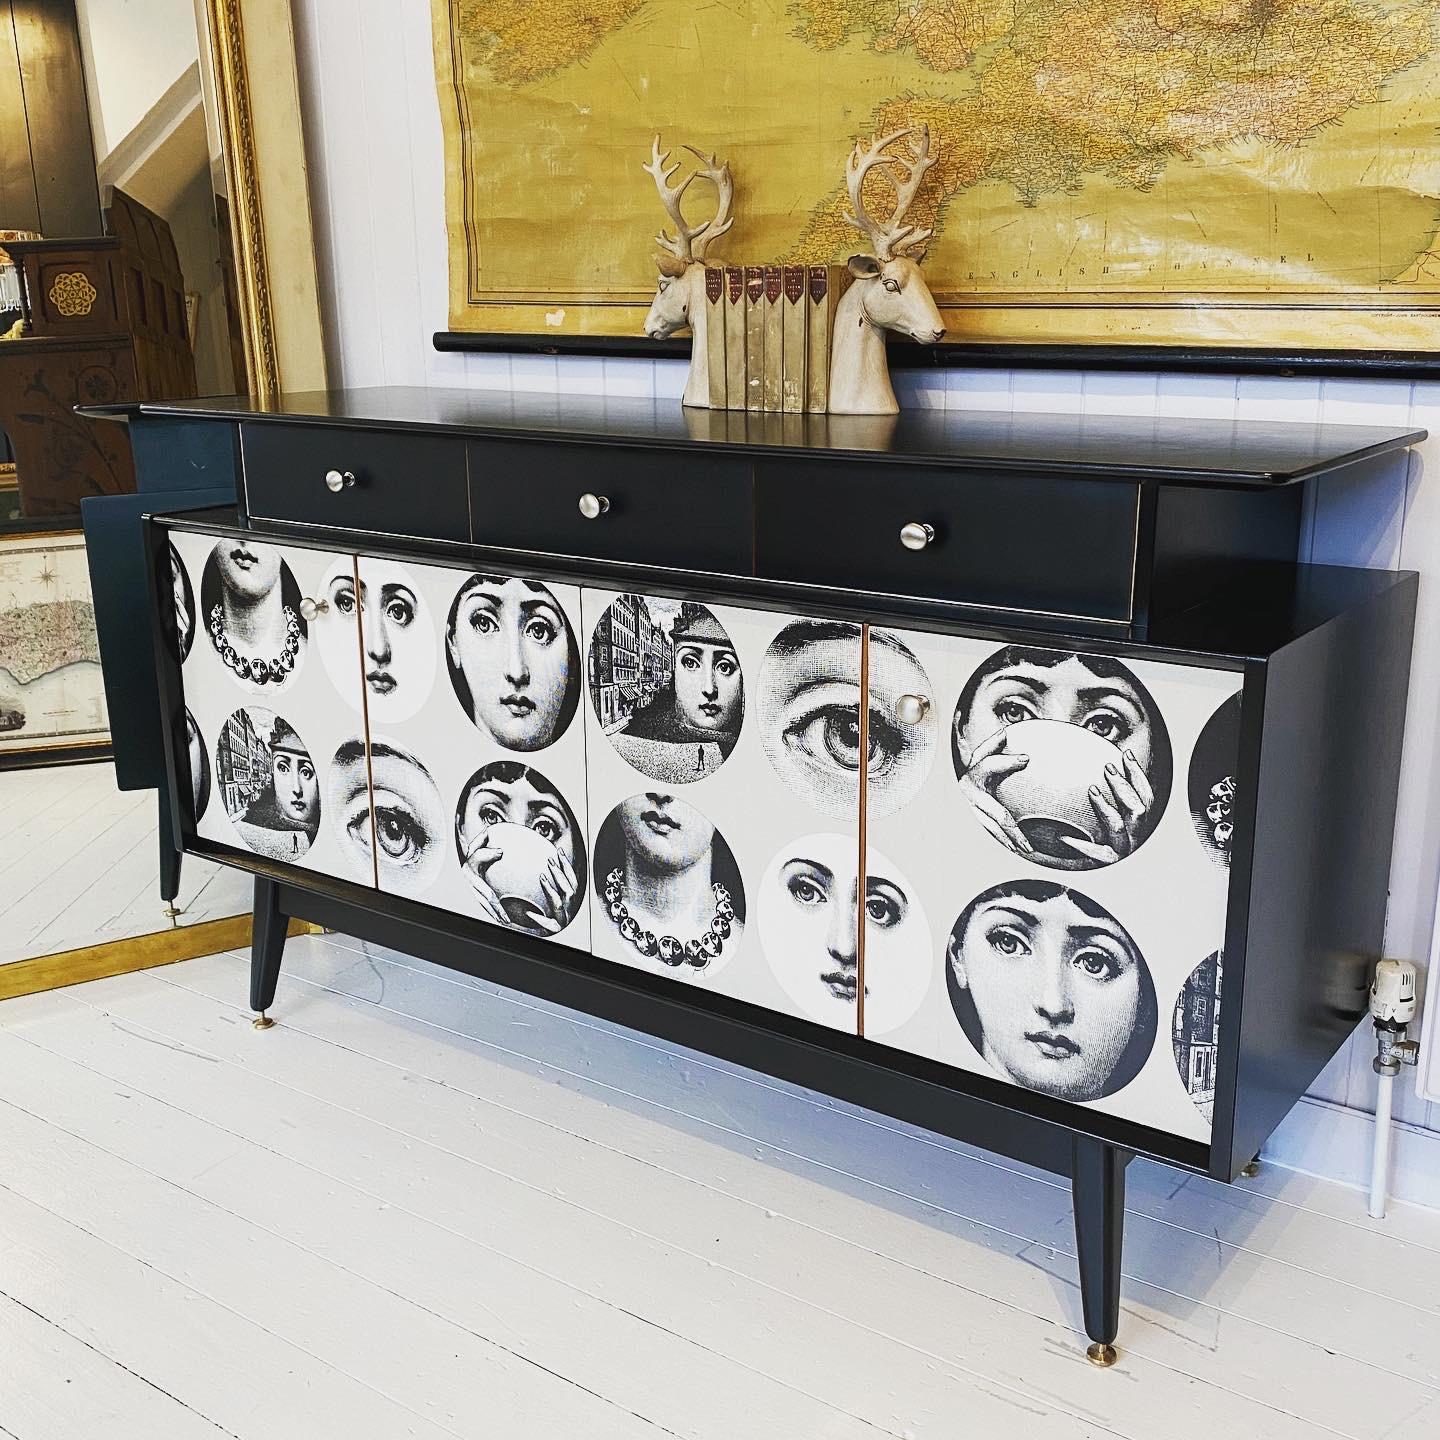 A beautifully made teak sideboard from the 1950s. Creatively decoupaged with a Fornasetti paper that is now discontinued. The sideboard has been restored, sanded and professionally hand sprayed. A wonderfully figured top section holding three